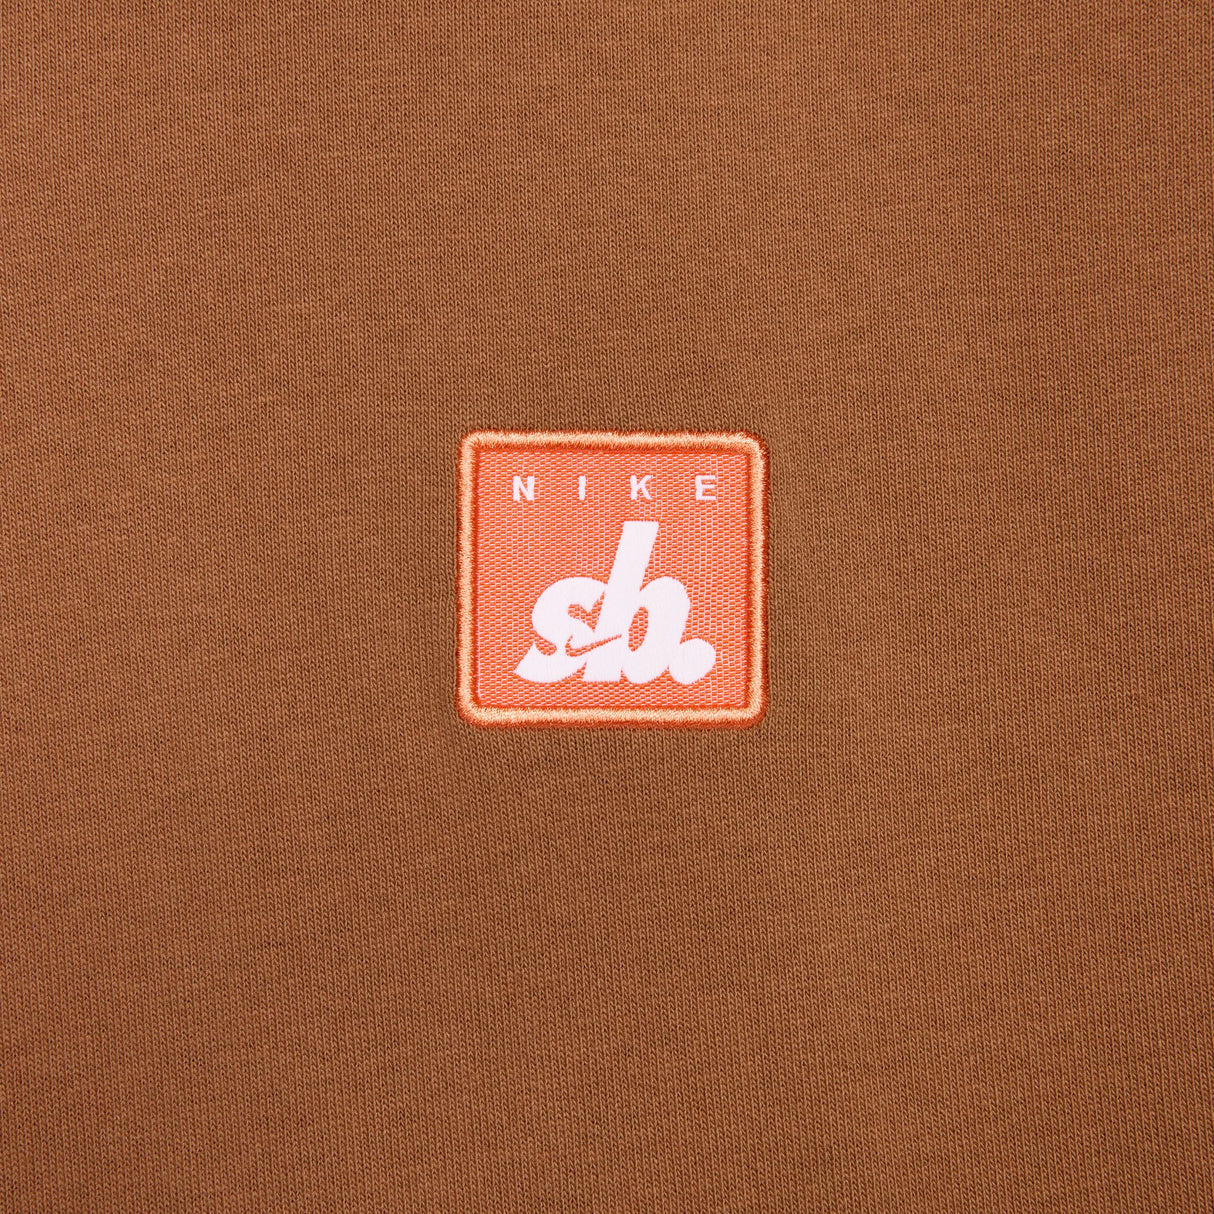 Nike SB Embroidered Patch Light British Tan S/s Shirt